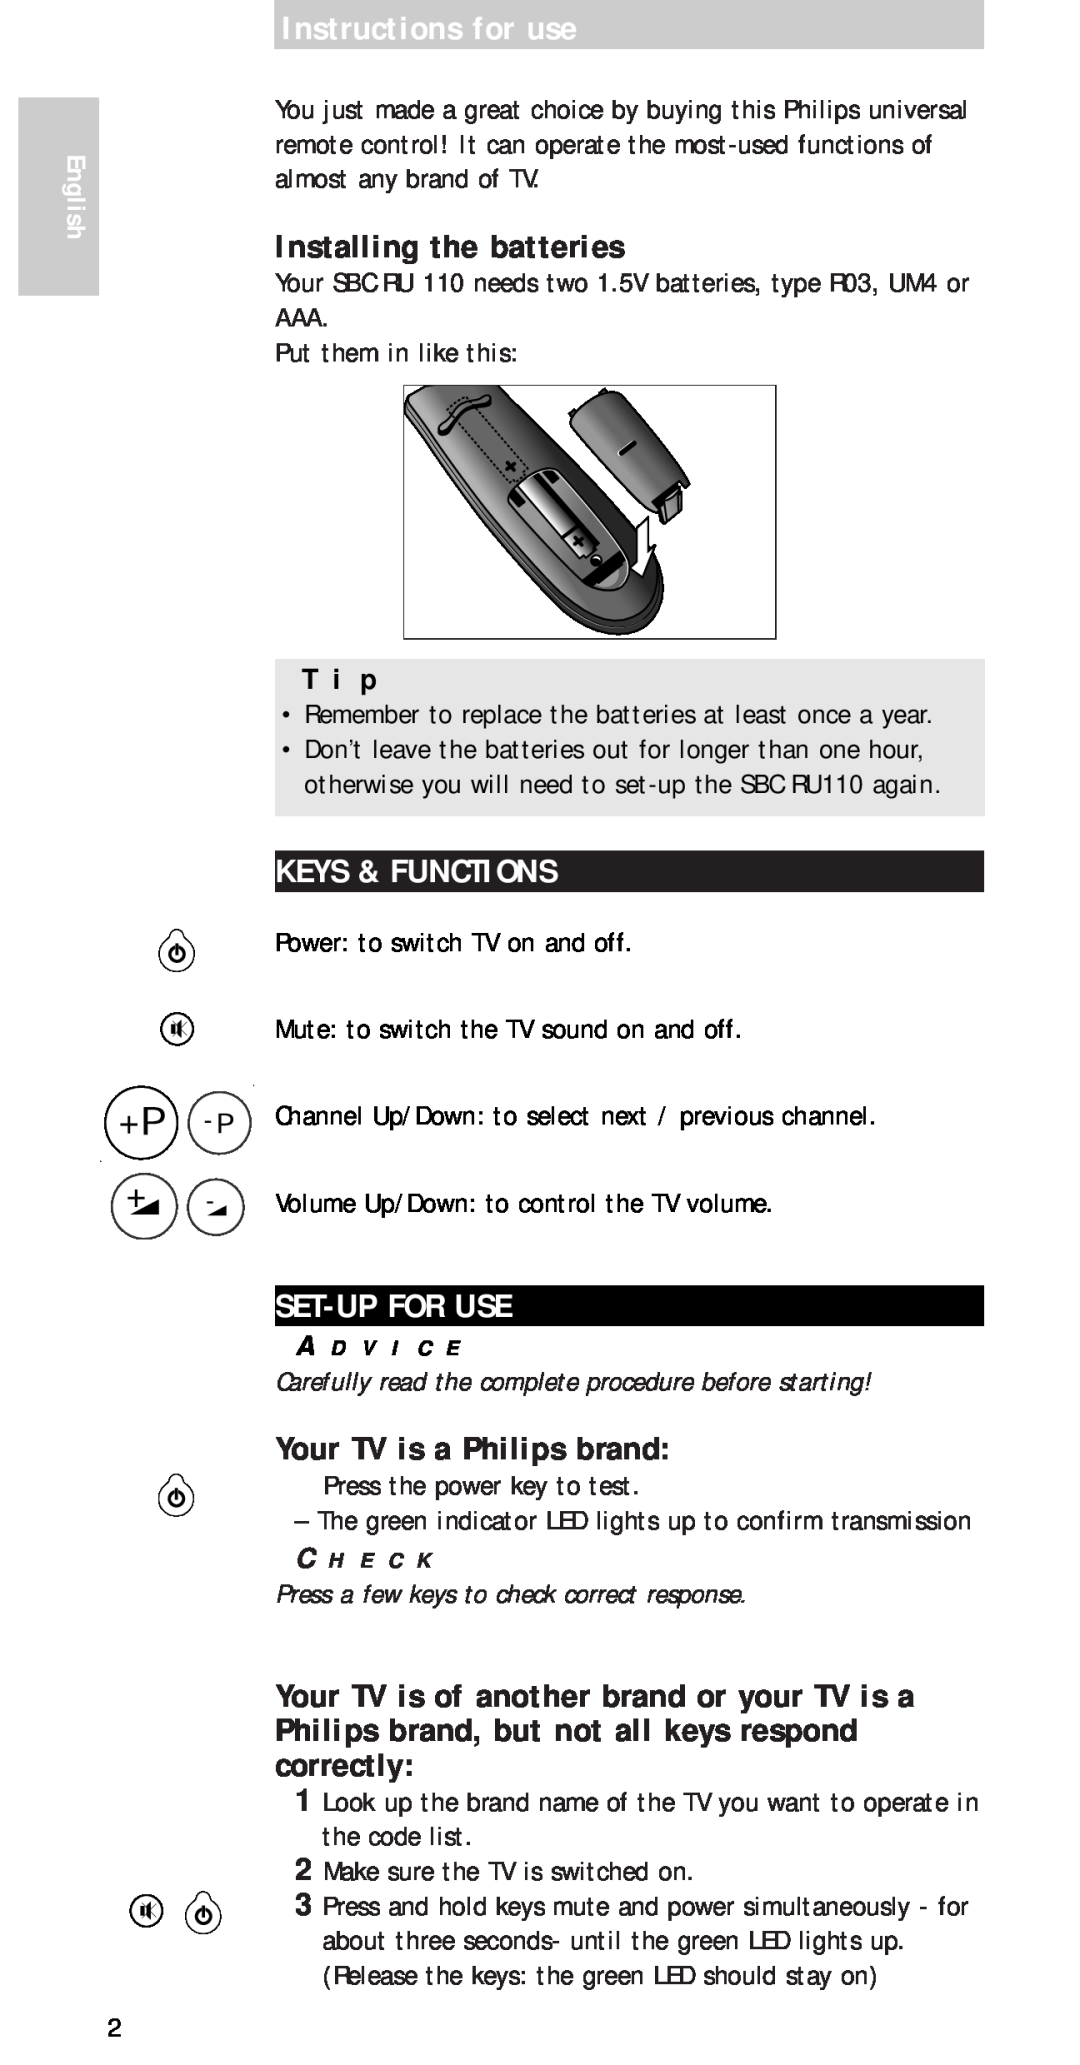 Philips sbc ru 110 manual Instructions for use, Installing the batteries, Keys & Functions, Set-Up For Use, T i p, English 